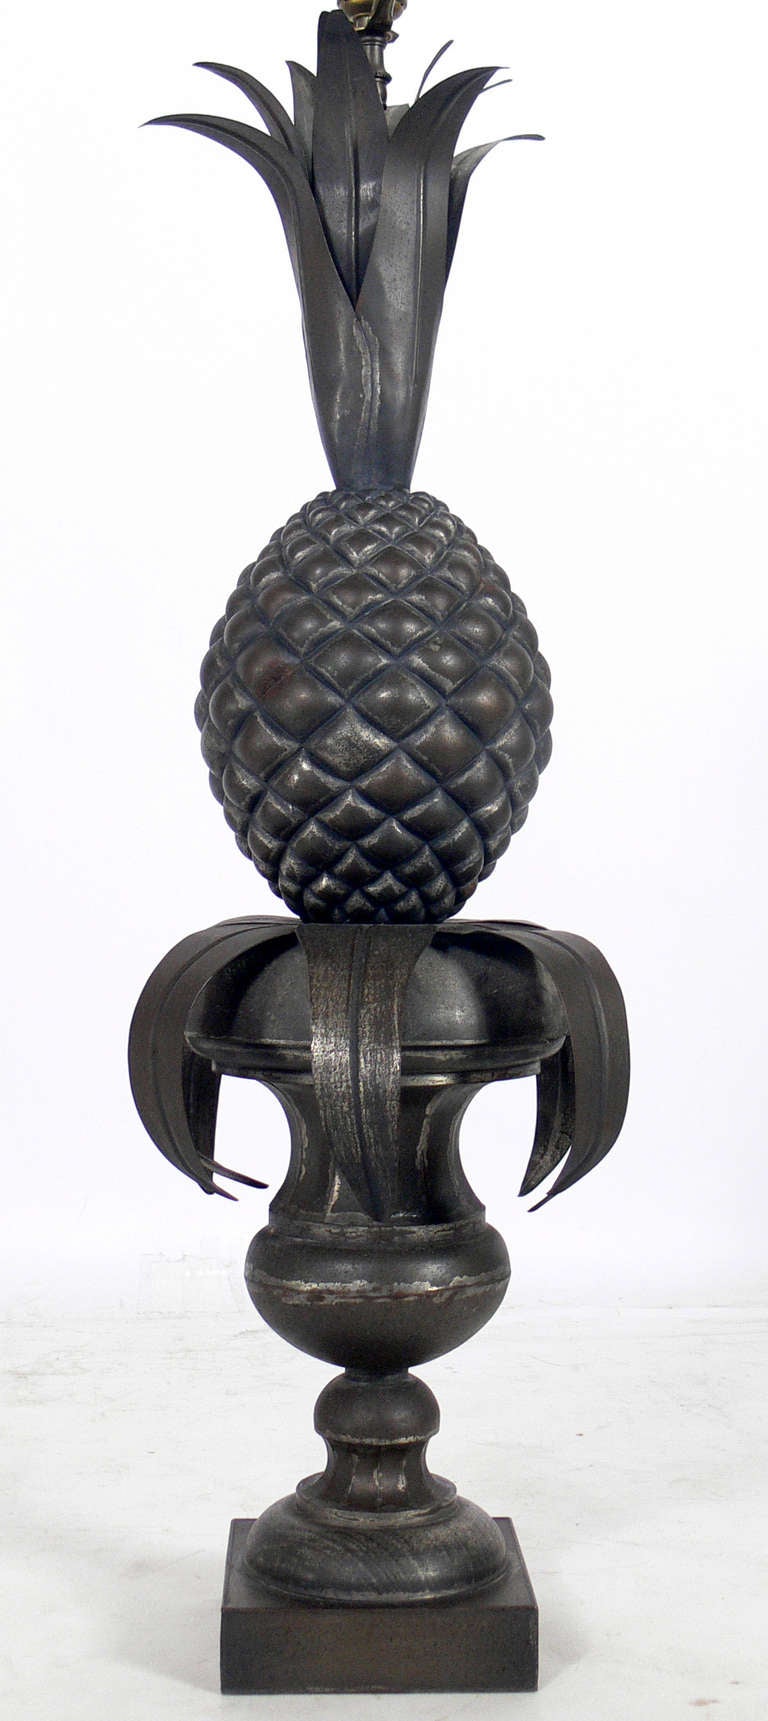 Sculptural Zinc Pineapple Table Lamp, circa 1950's. Retains warm original patina. Rewired and ready to use.